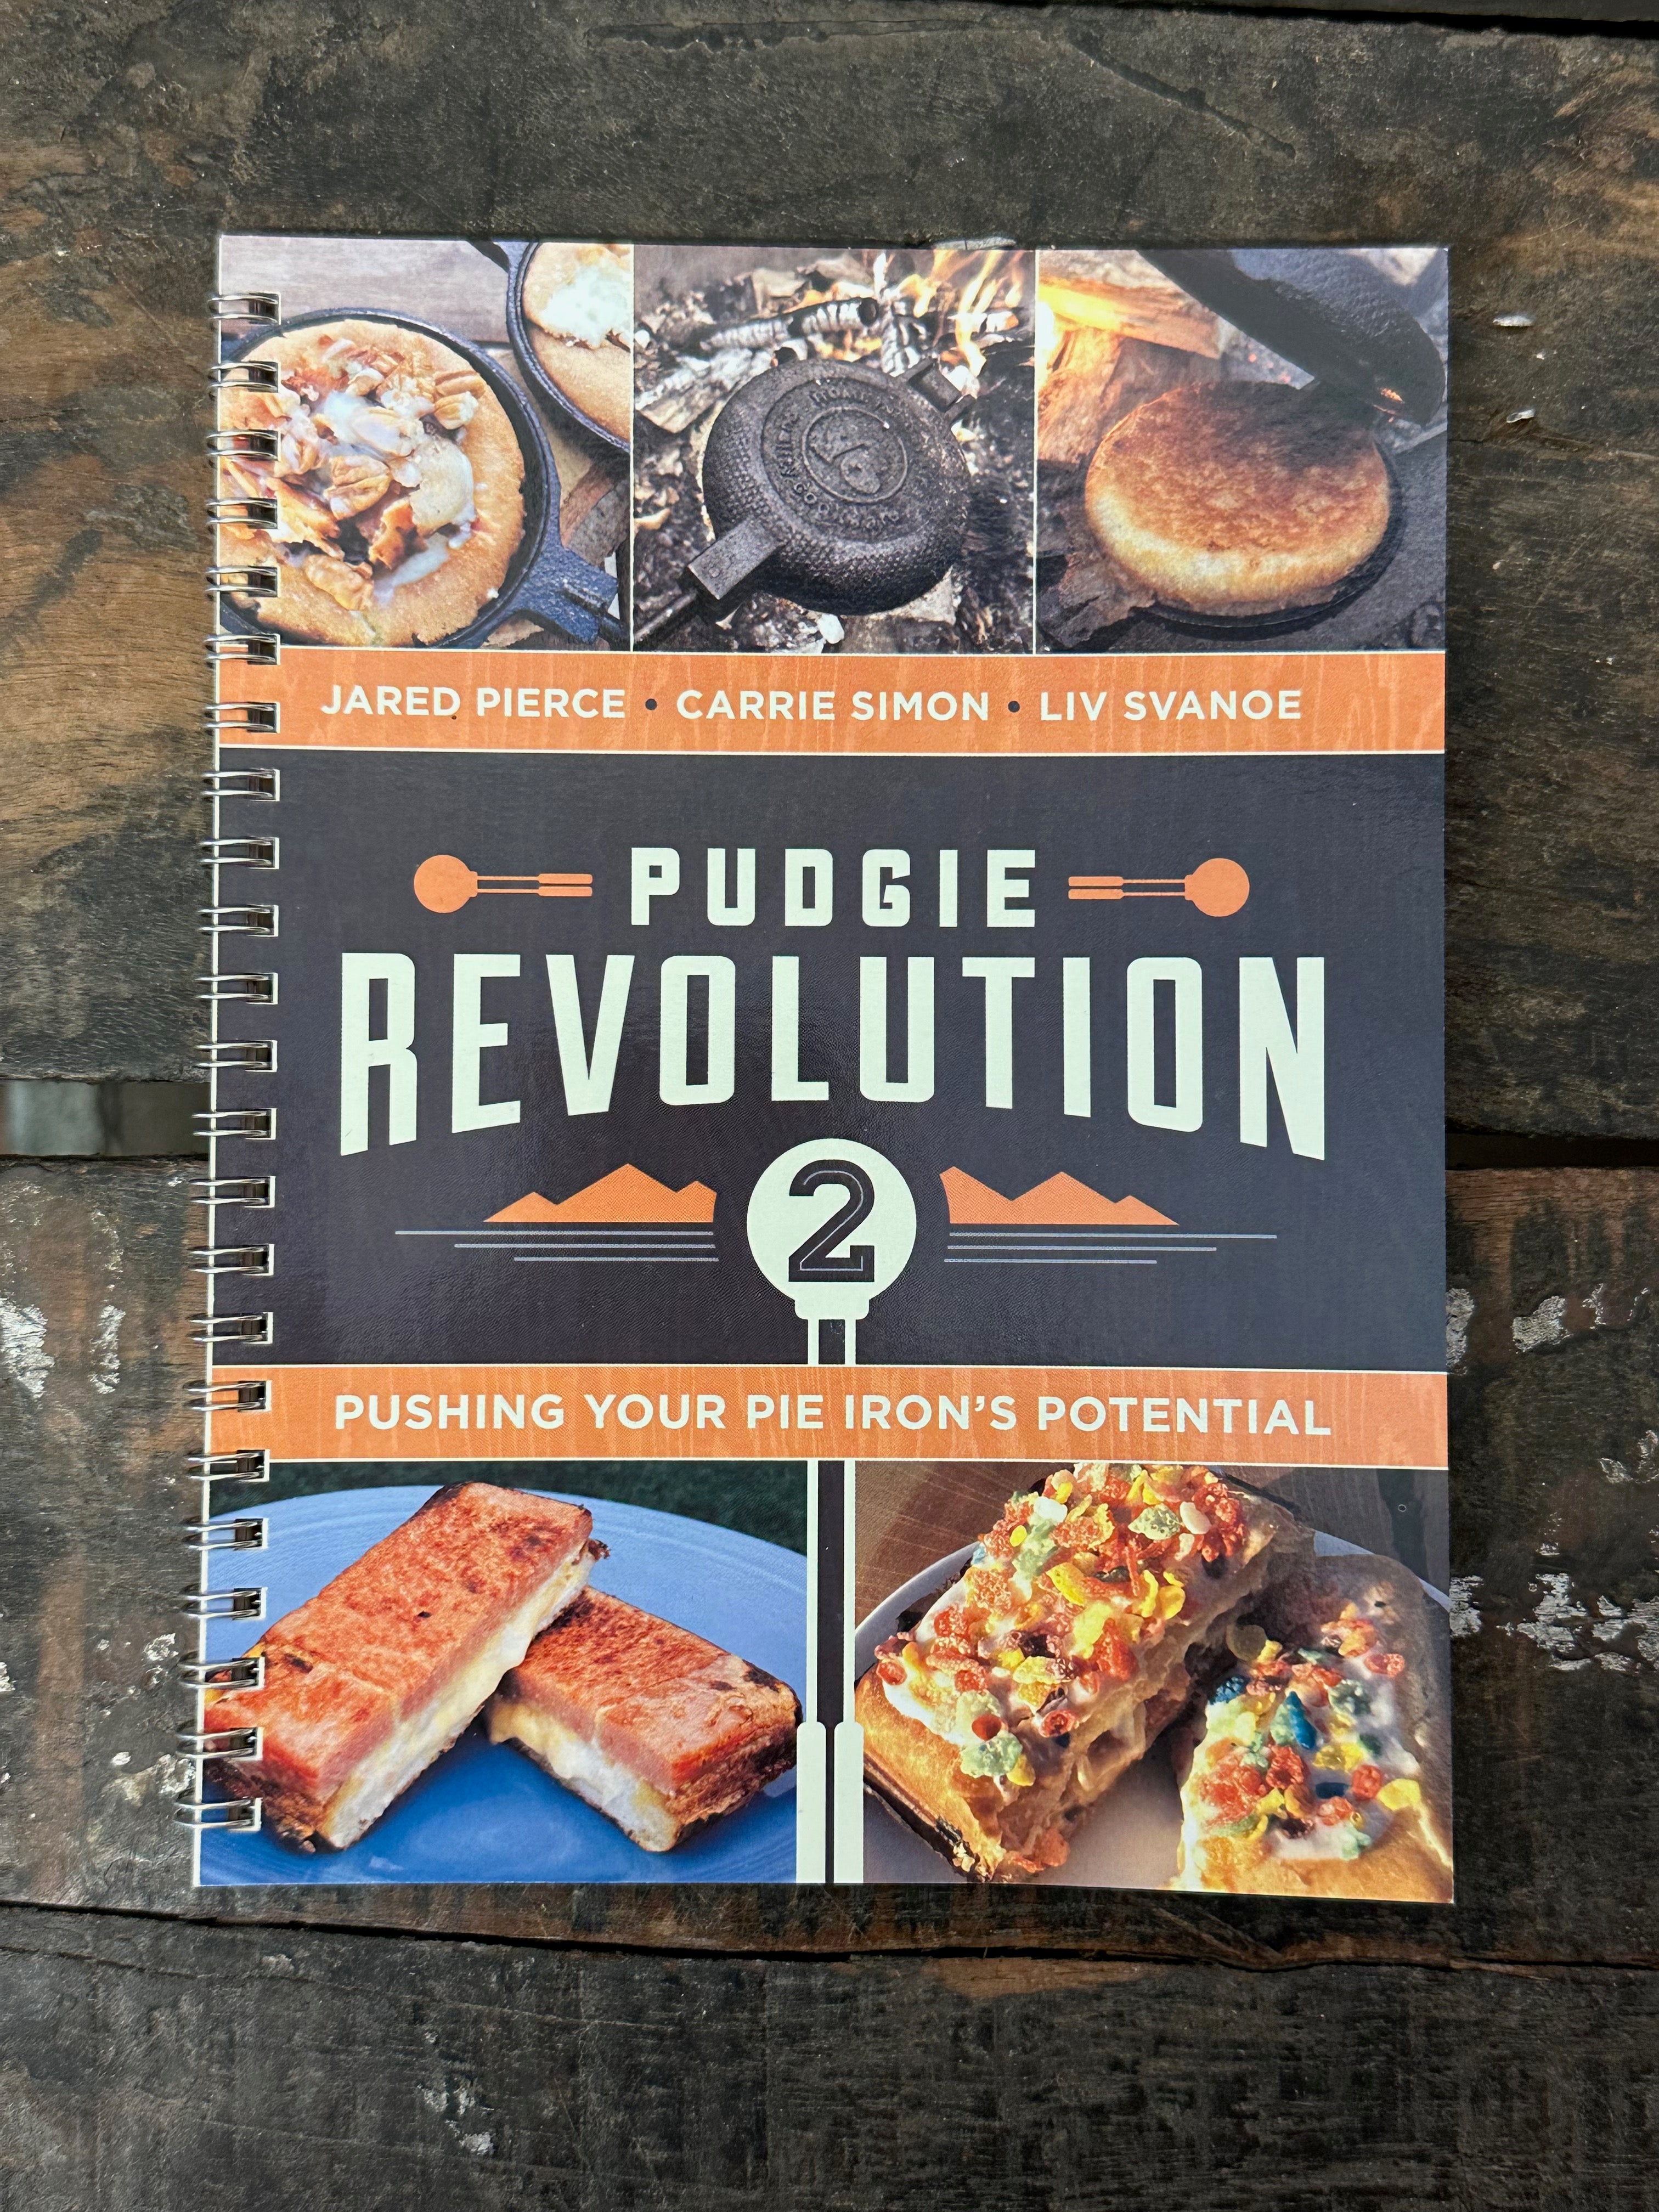 Chop it, fill it and bake it in a pie: 'Pudgie Revolution' takes